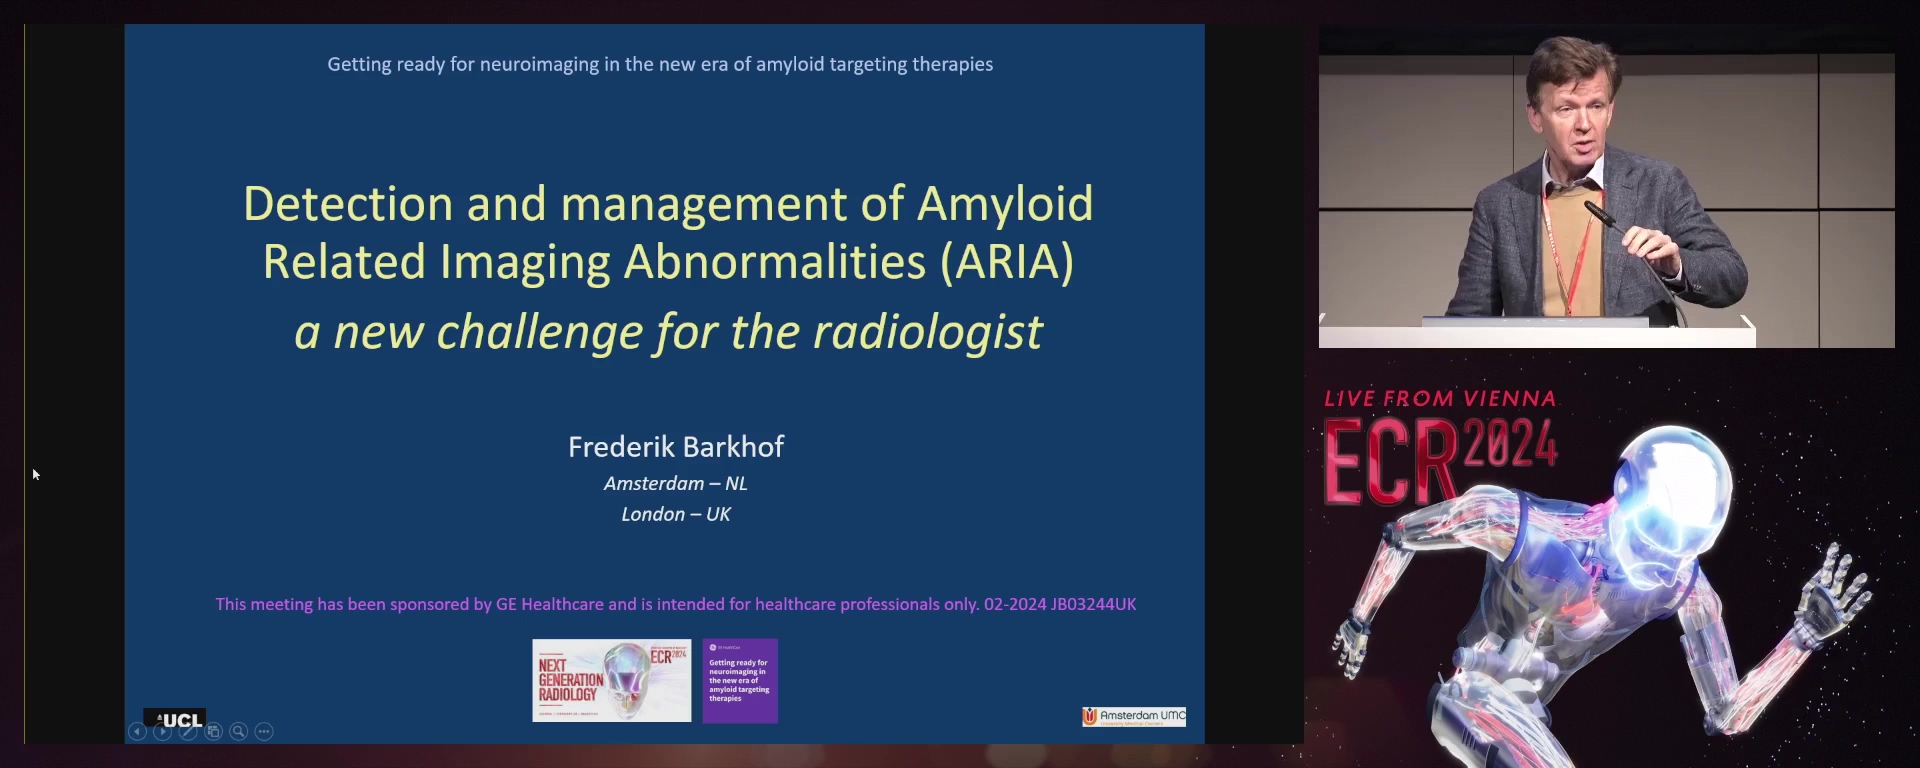 Detection and management of ARIA – a new challenge for the radiologist.